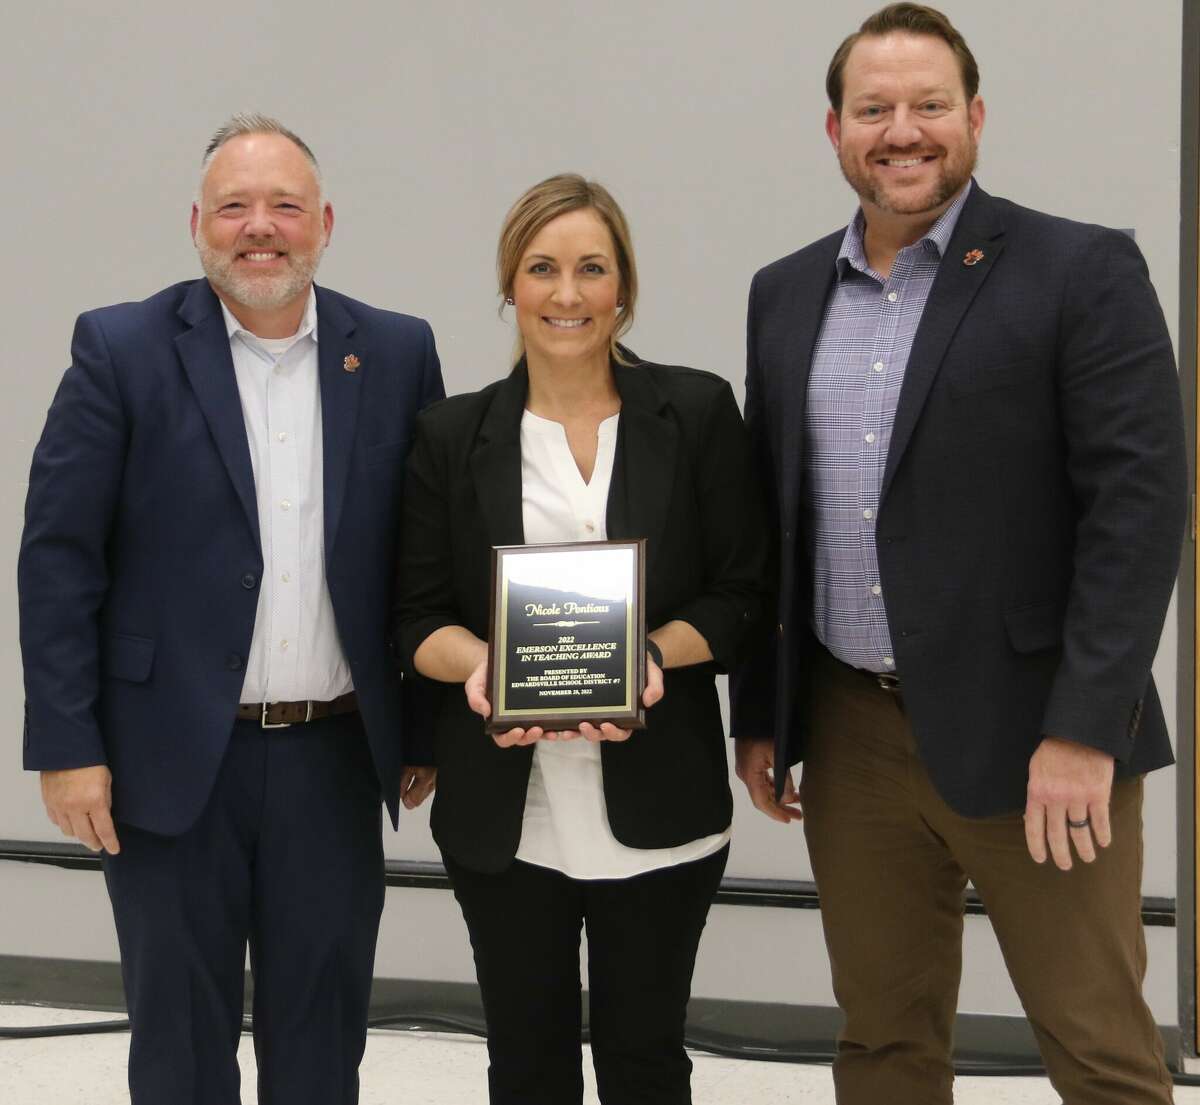 Nickie Pontious, center, was honored Monday as an Emerson 2022 Excellence in Teaching Award recipient. With her are District 7 Superintendent Dr. Patrick Shelton, left, and Board of Education President John McDole.